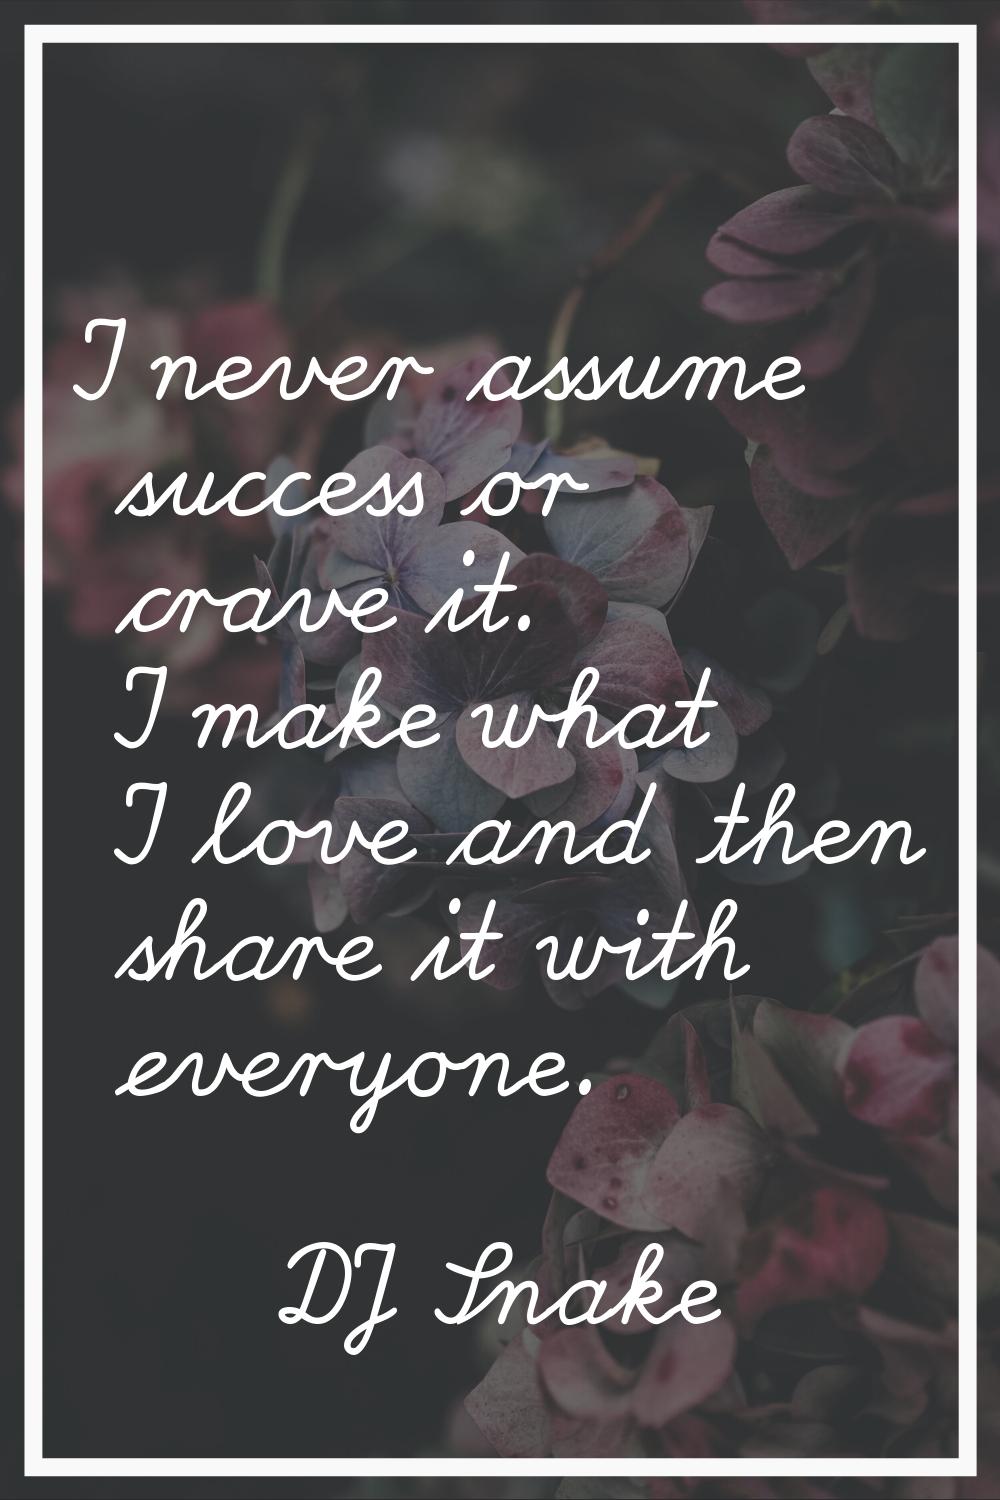 I never assume success or crave it. I make what I love and then share it with everyone.